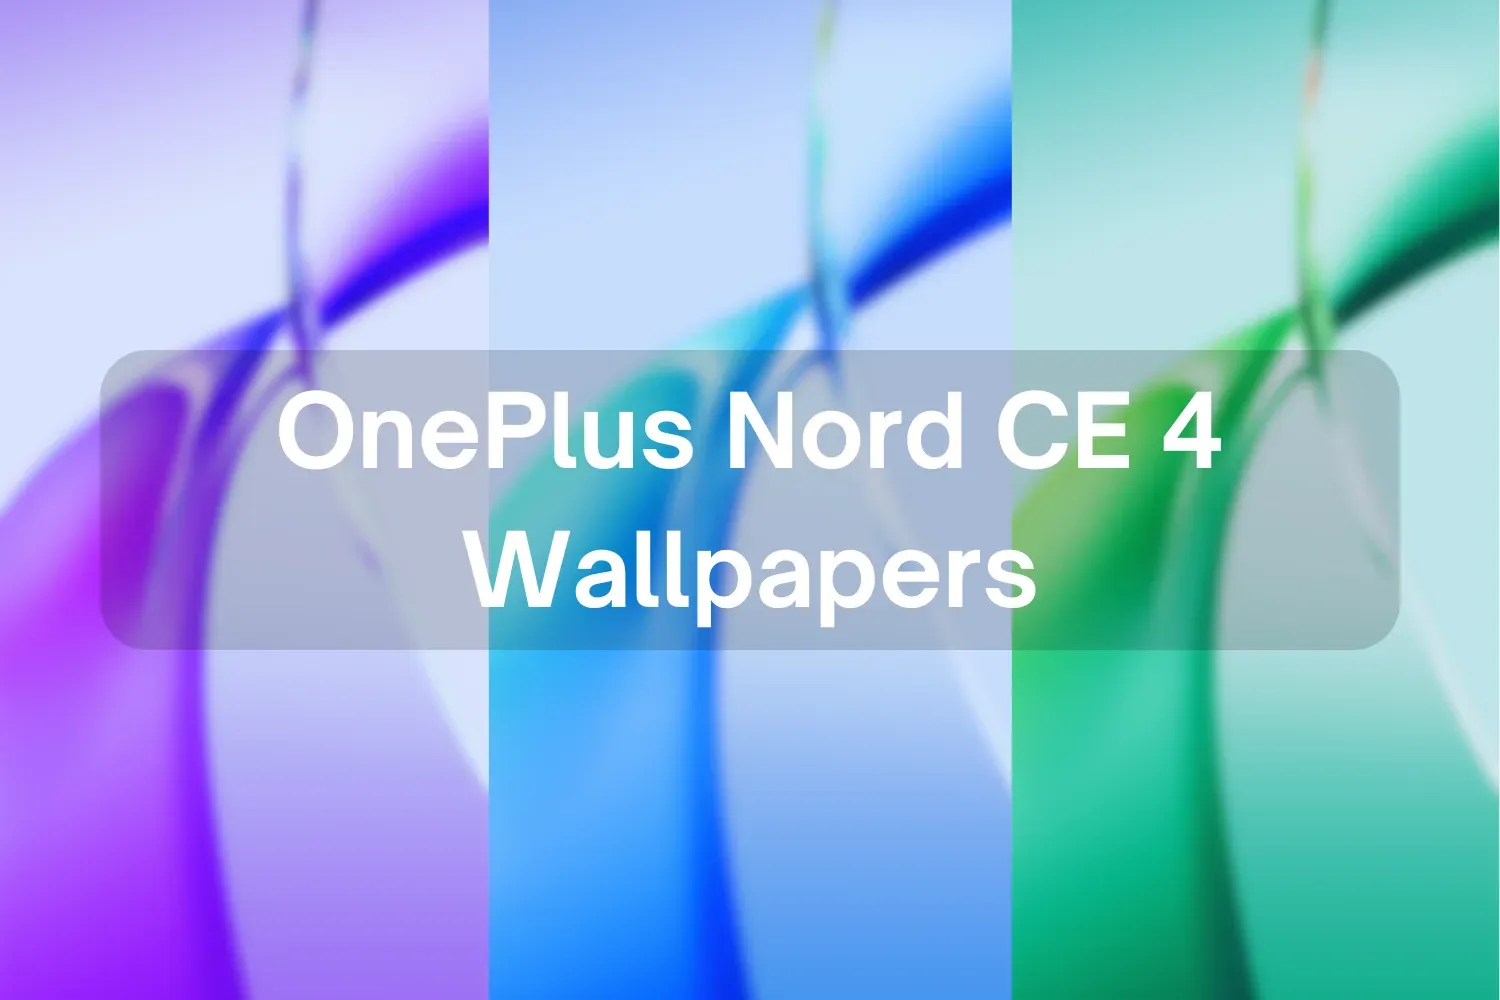 Download OnePlus Nord CE 4 Wallpapers in FHD+